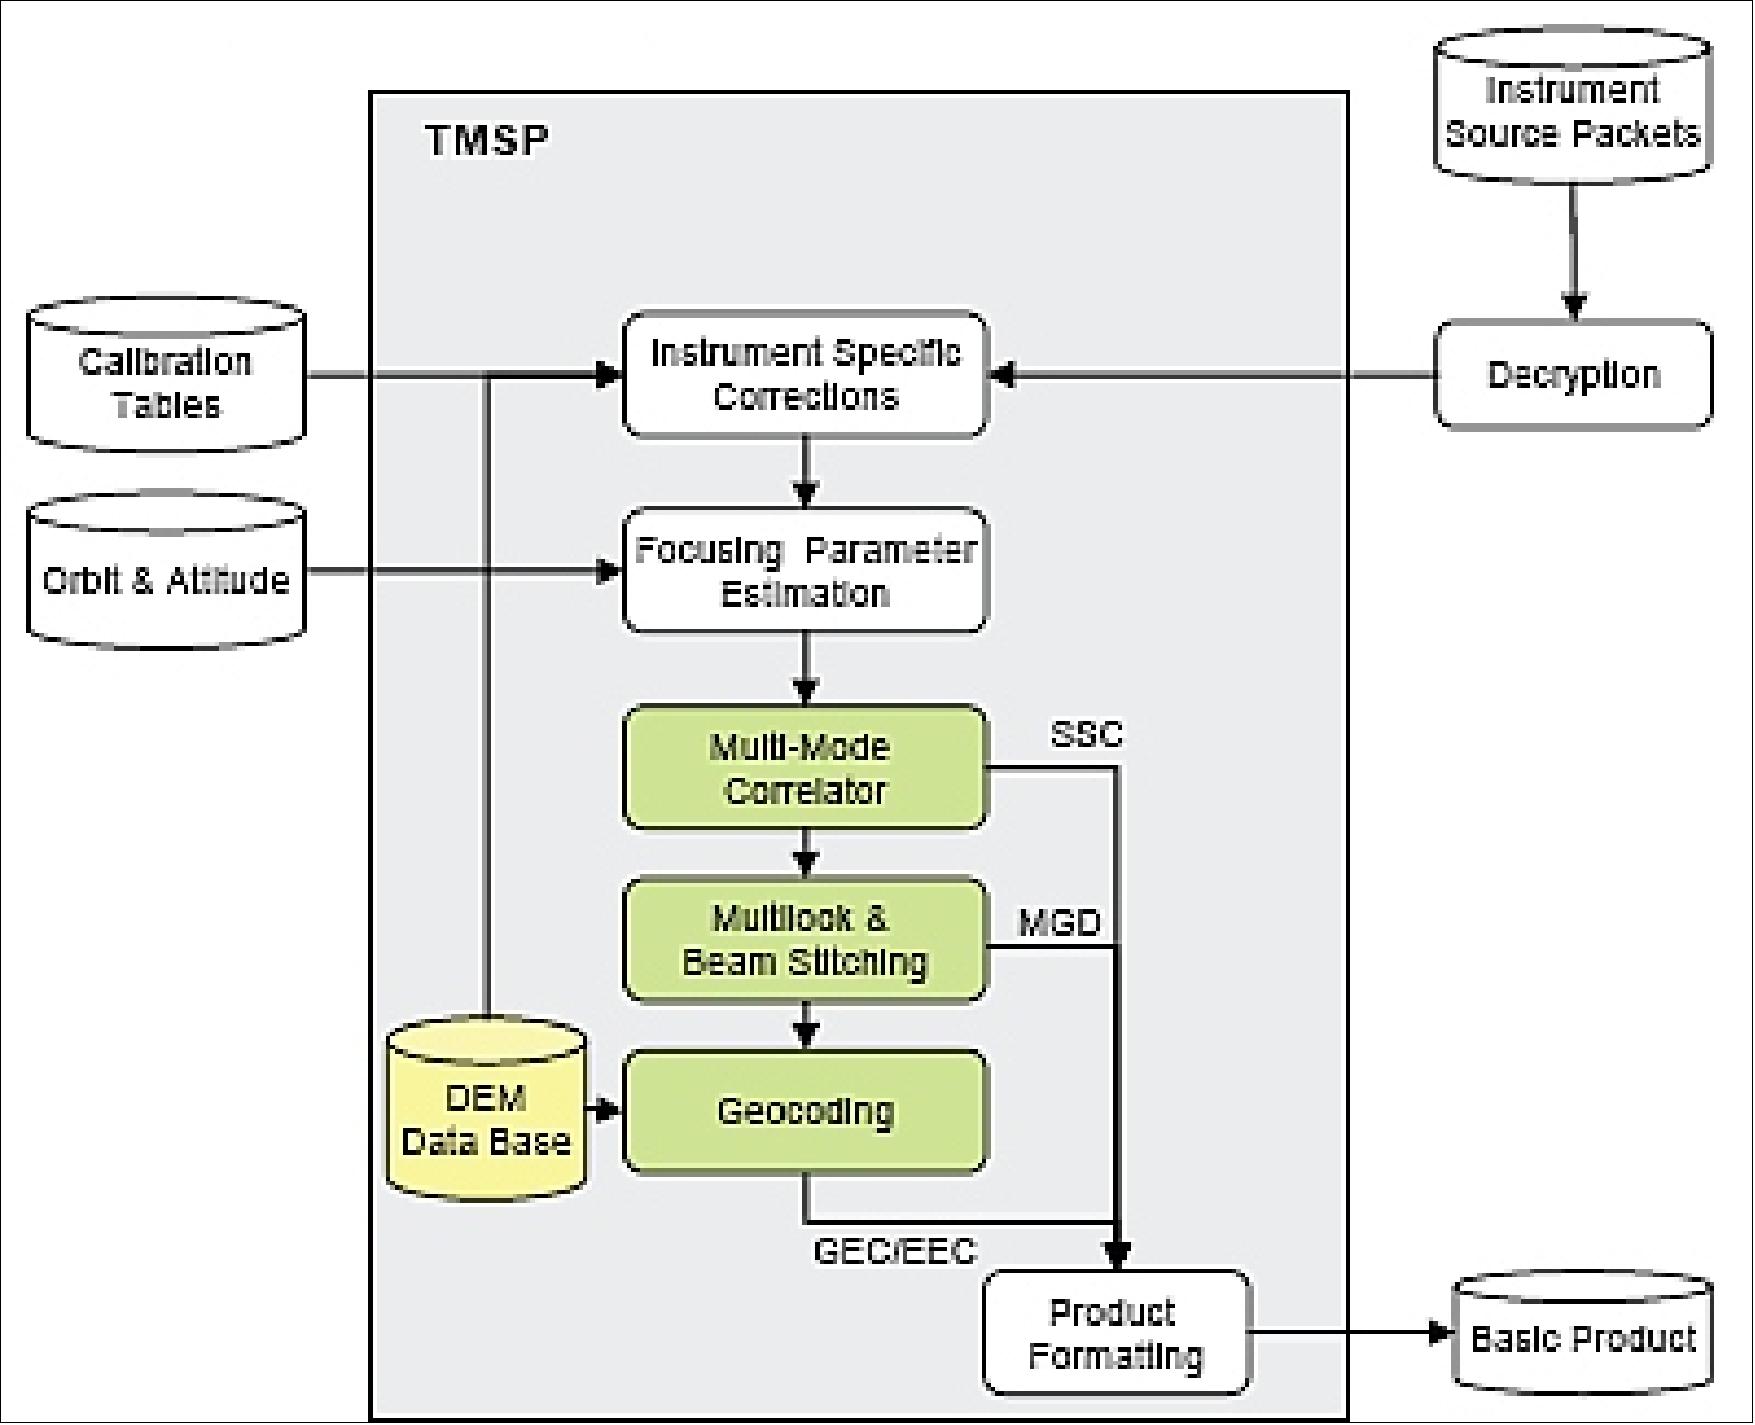 Figure 49: Overview of the TMSP processing concept (image credit: DLR)